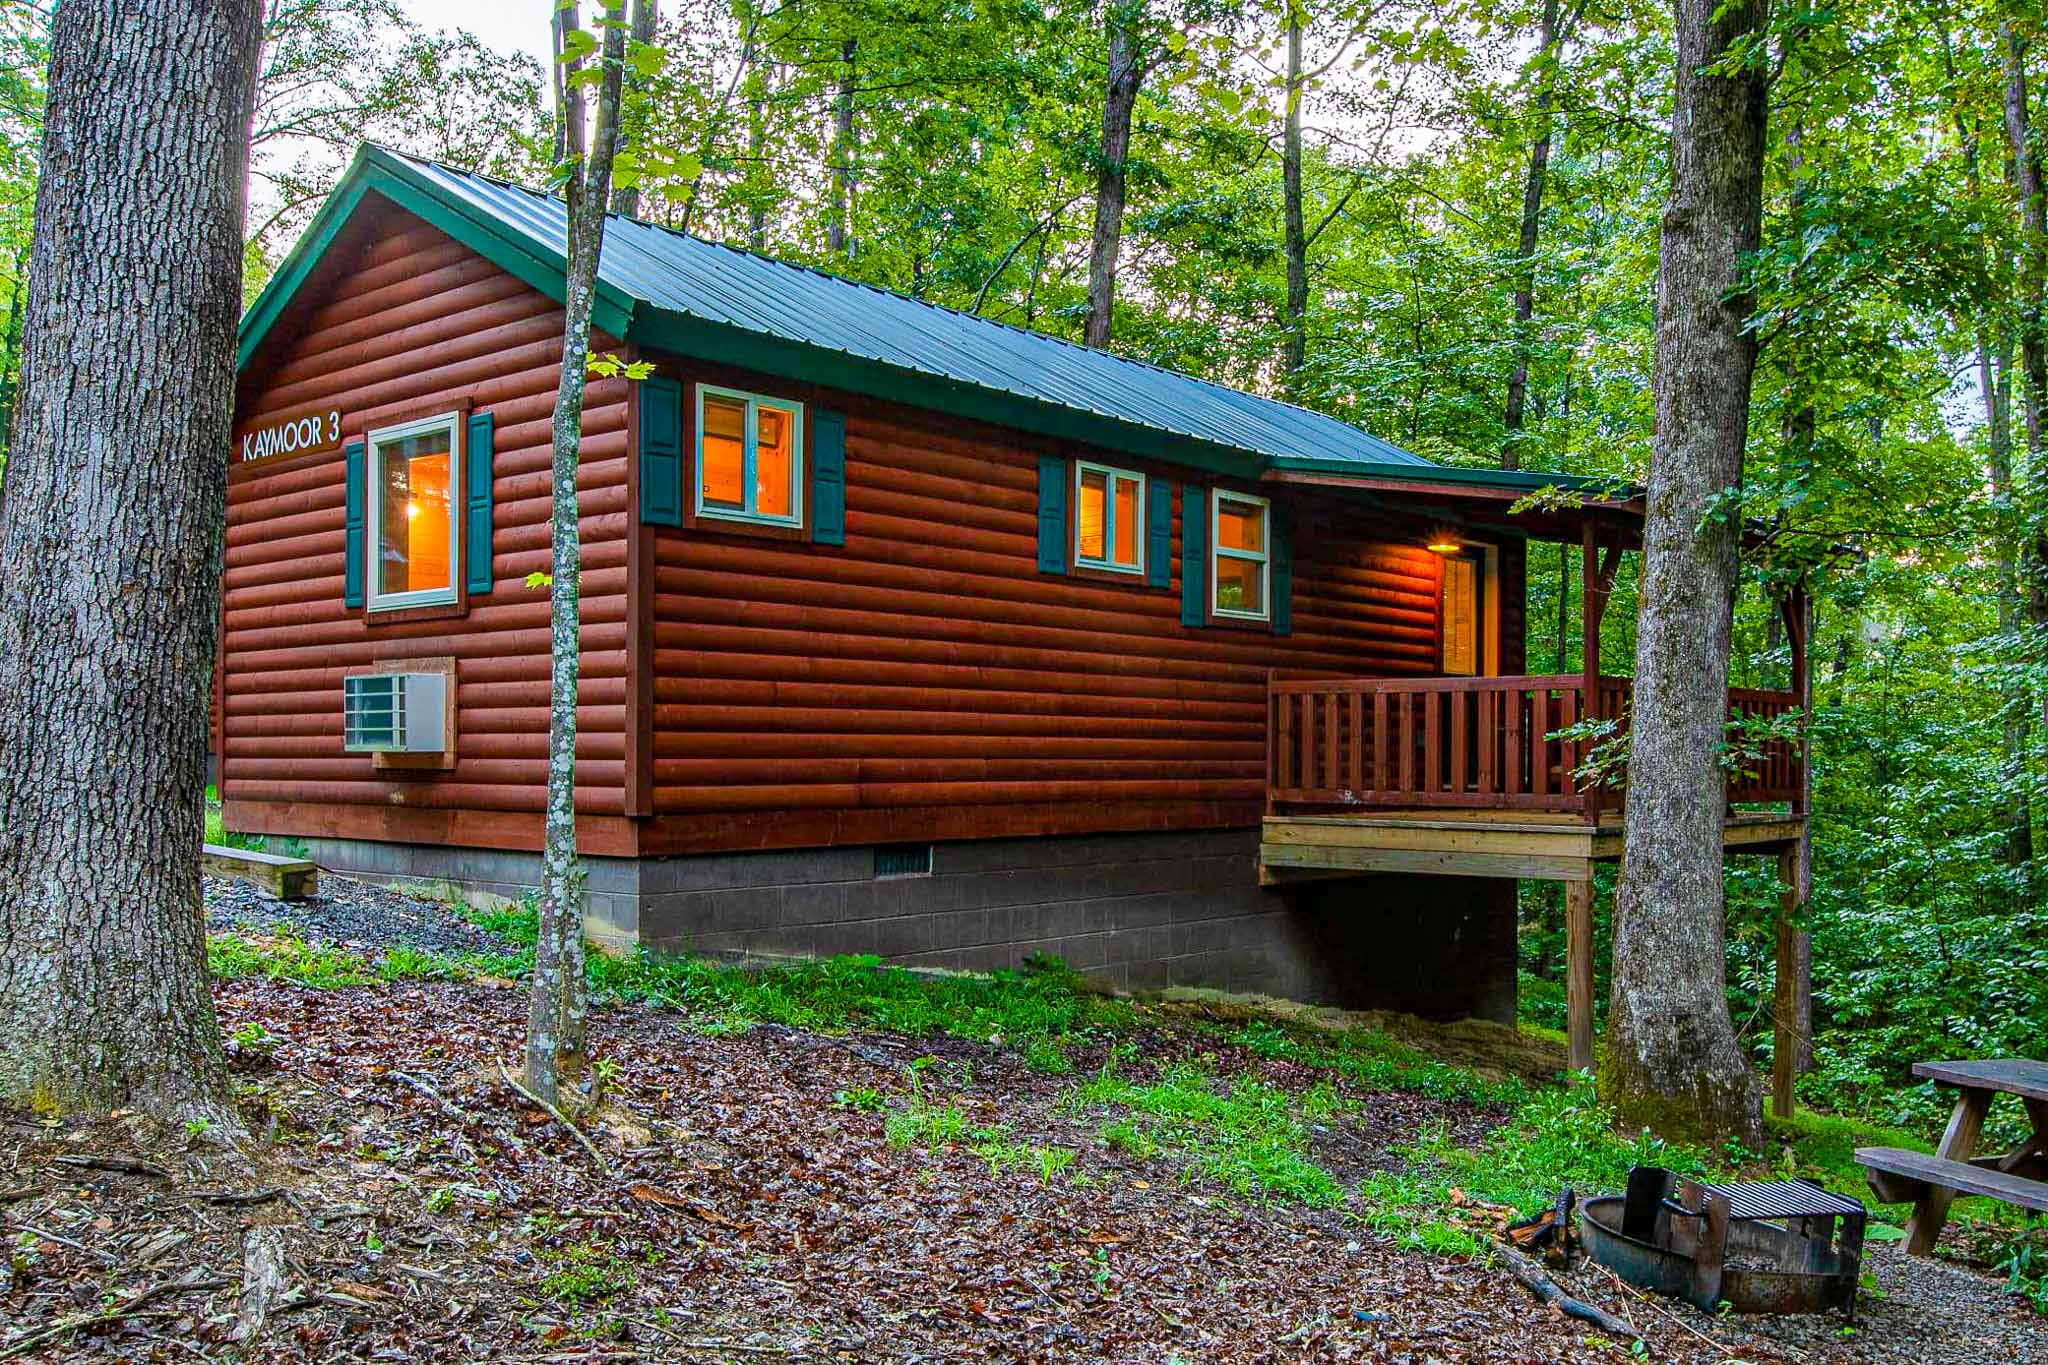 Kaymoor Suites Hotel Style Cabins Adventures on the Gorge